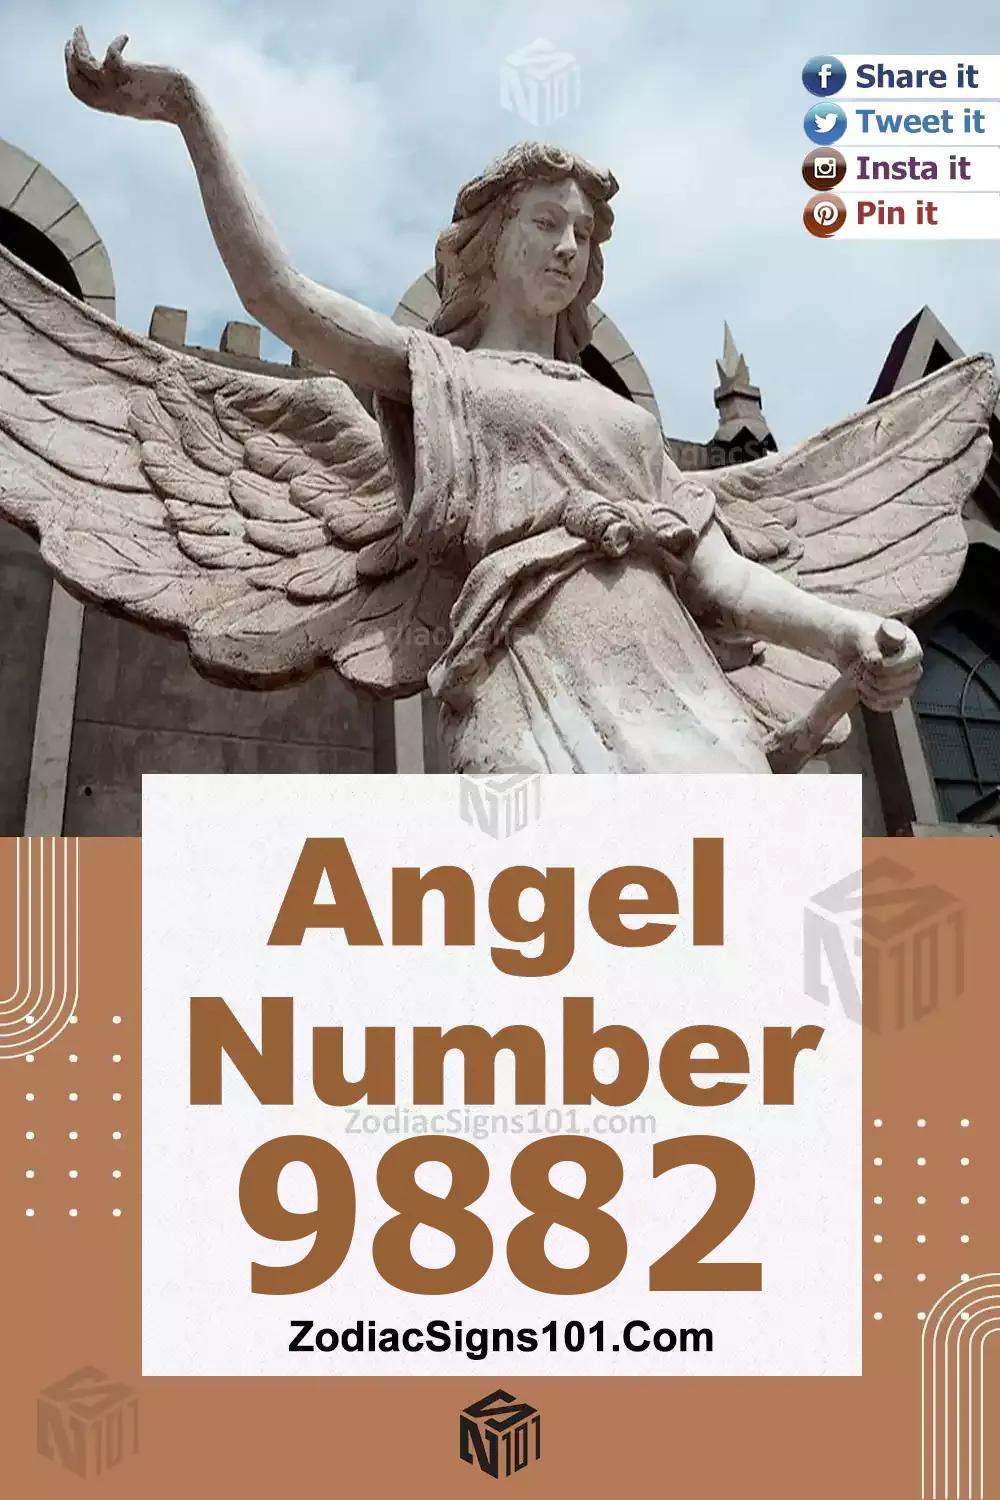 9882 Angel Number Meaning